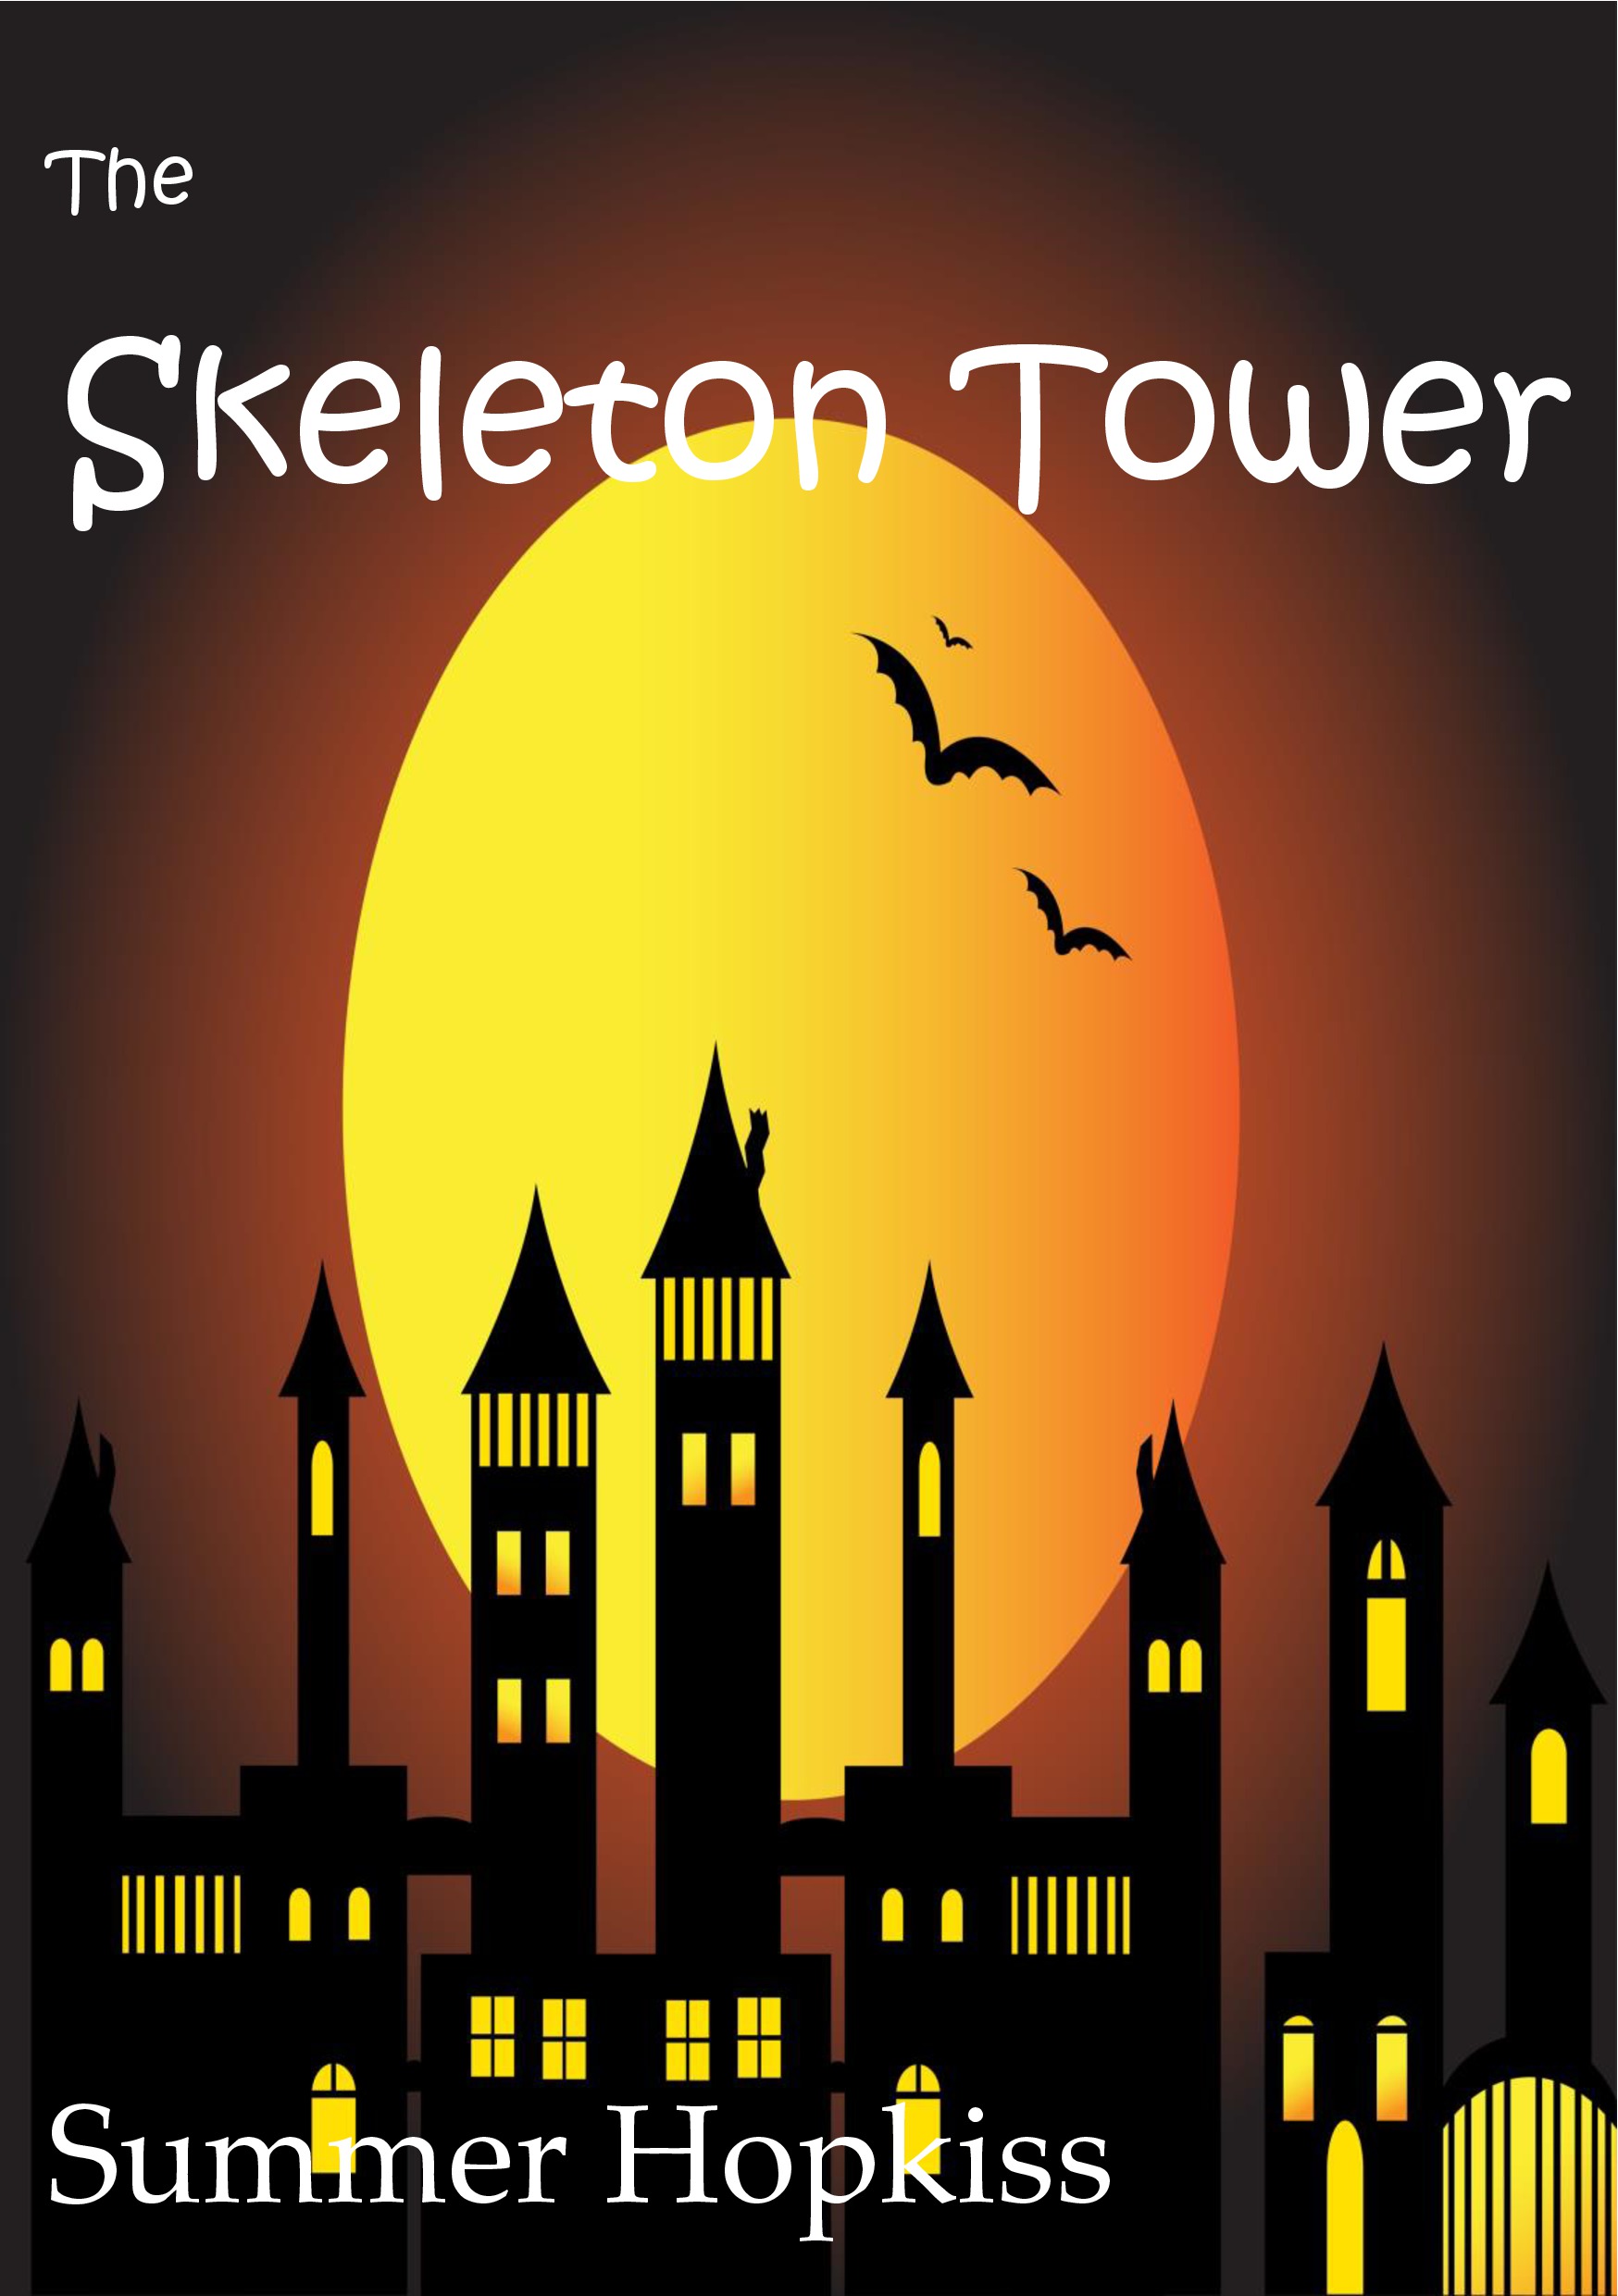 The Skeleton Tower by Summer Hopkiss